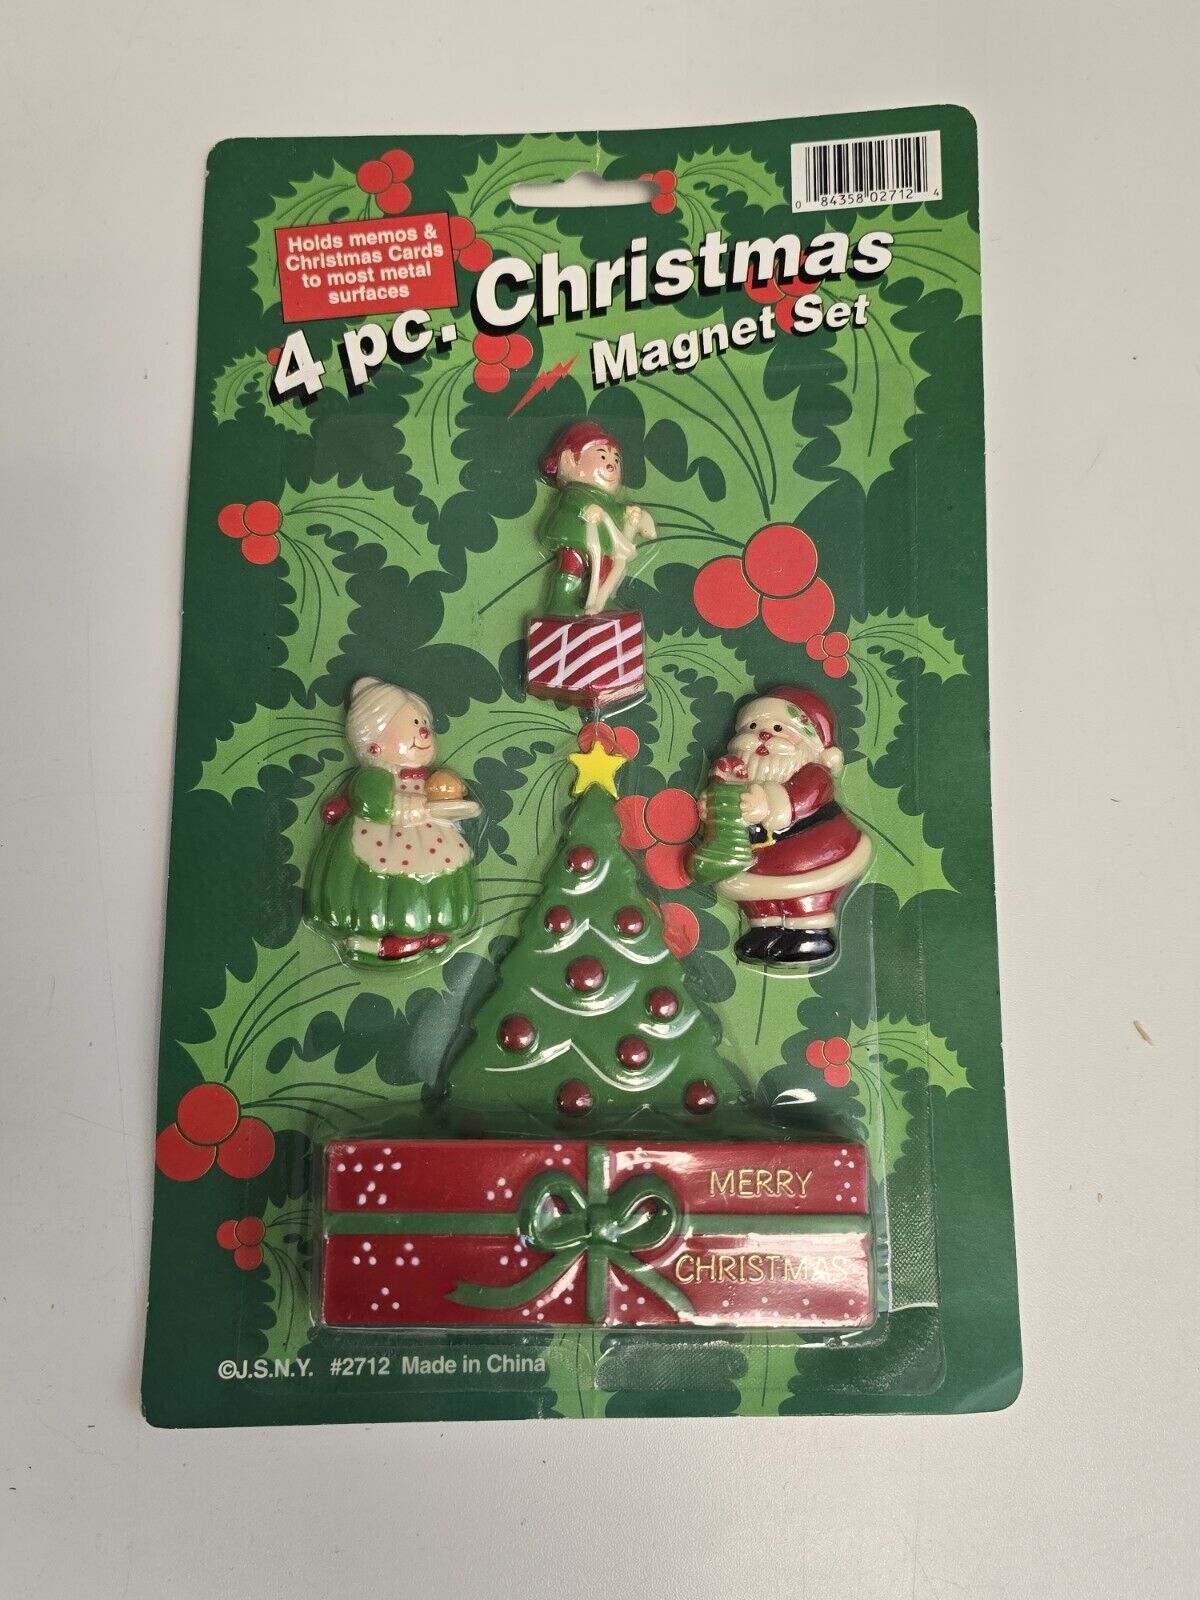 VTG J.S.N.Y. 4 Piece Christmas Holiday Magnets With Original Packaging New